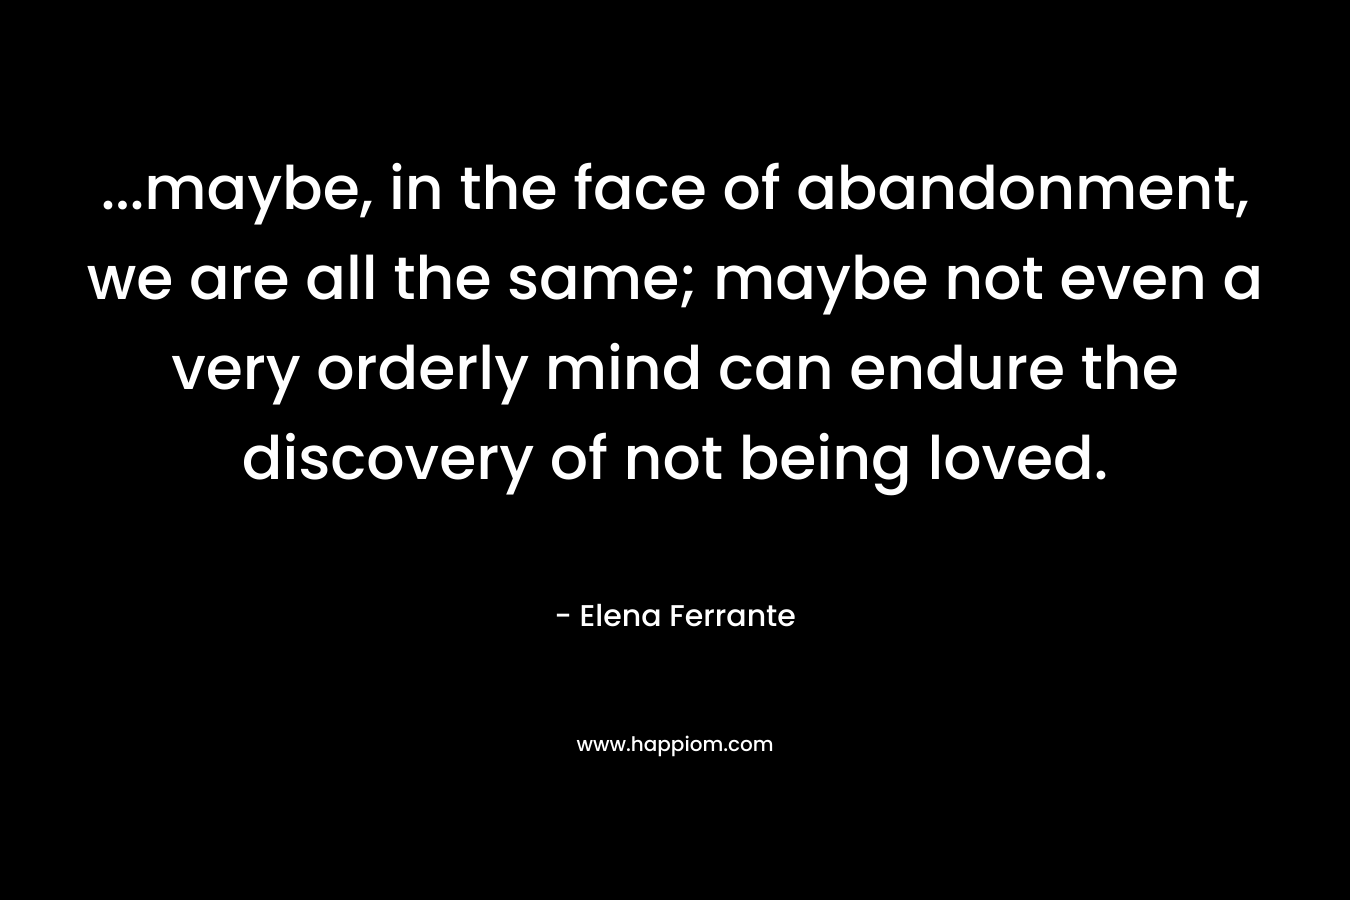 …maybe, in the face of abandonment, we are all the same; maybe not even a very orderly mind can endure the discovery of not being loved. – Elena Ferrante